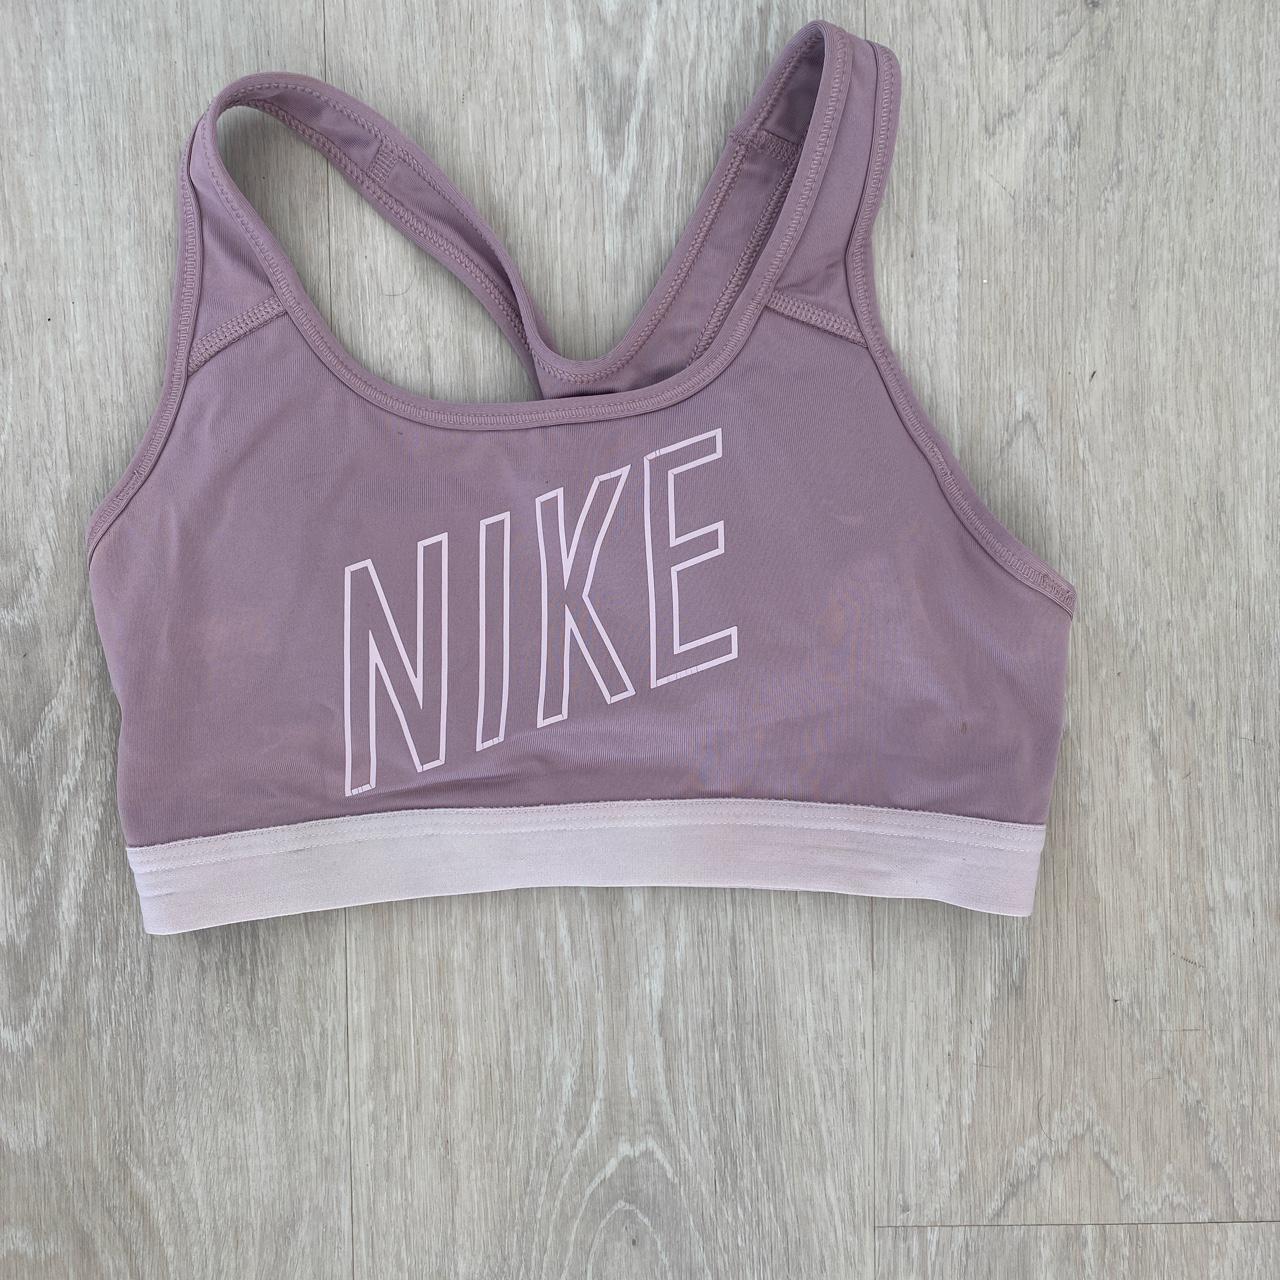 Product Image 1 - Nike sports bra 
Perfect condition